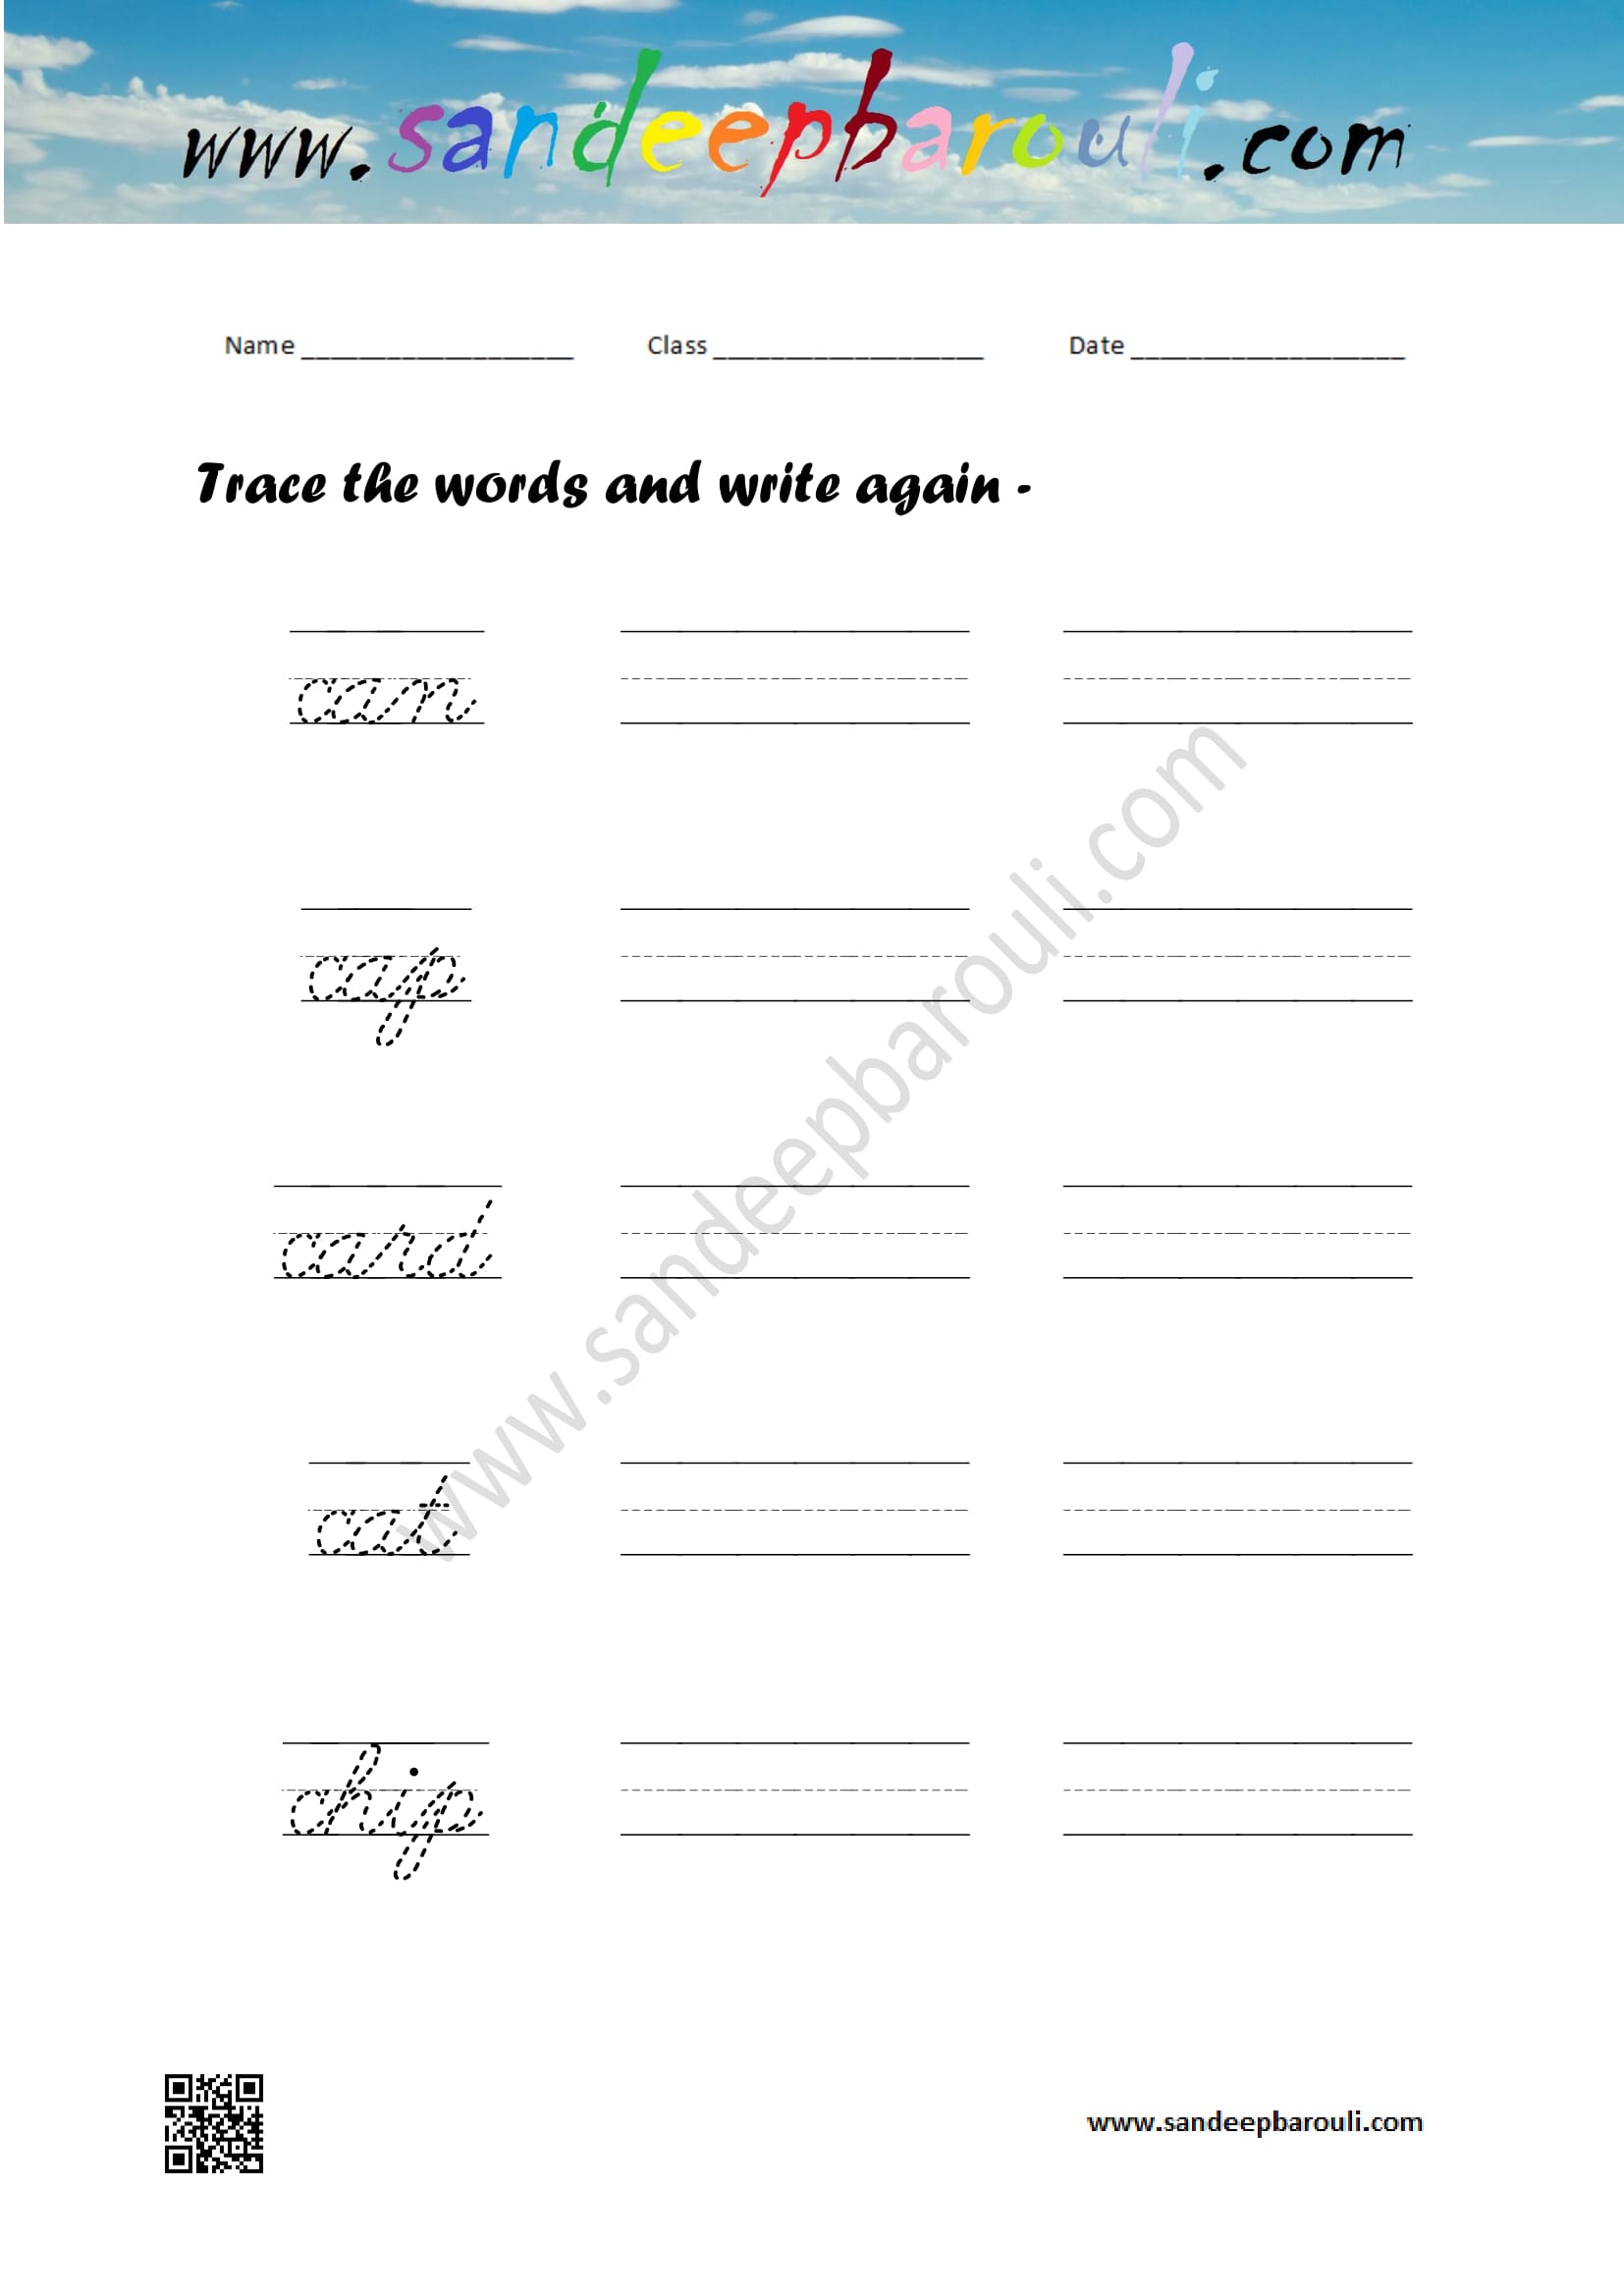 Cursive writing worksheet – trace the words and write again (4)